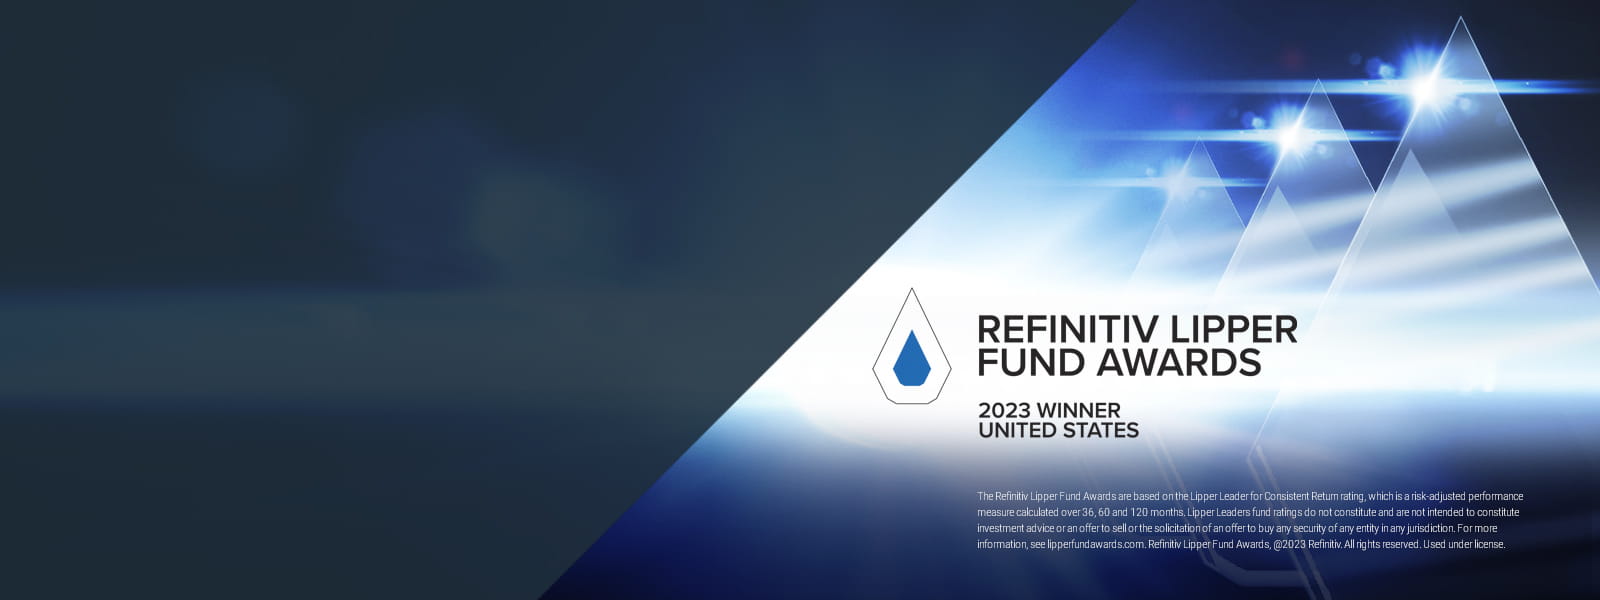 Carillon Family of Funds is named 2023 U.S. Refinitiv Lipper Fund Awards Best Fixed Income Small Fund Family Group, as of 11/30/22.